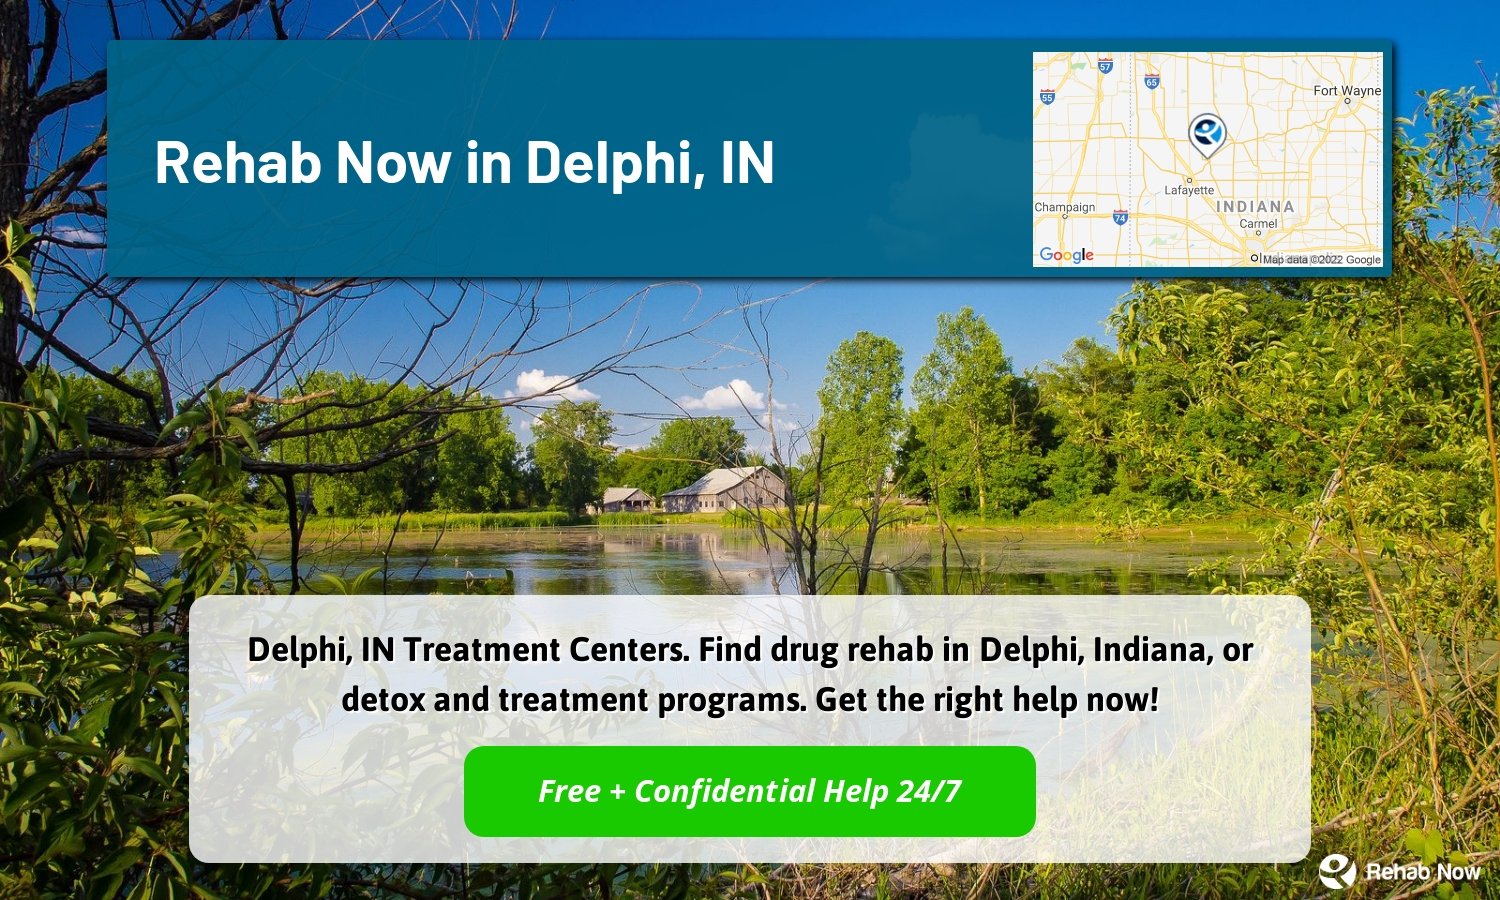 Delphi, IN Treatment Centers. Find drug rehab in Delphi, Indiana, or detox and treatment programs. Get the right help now!